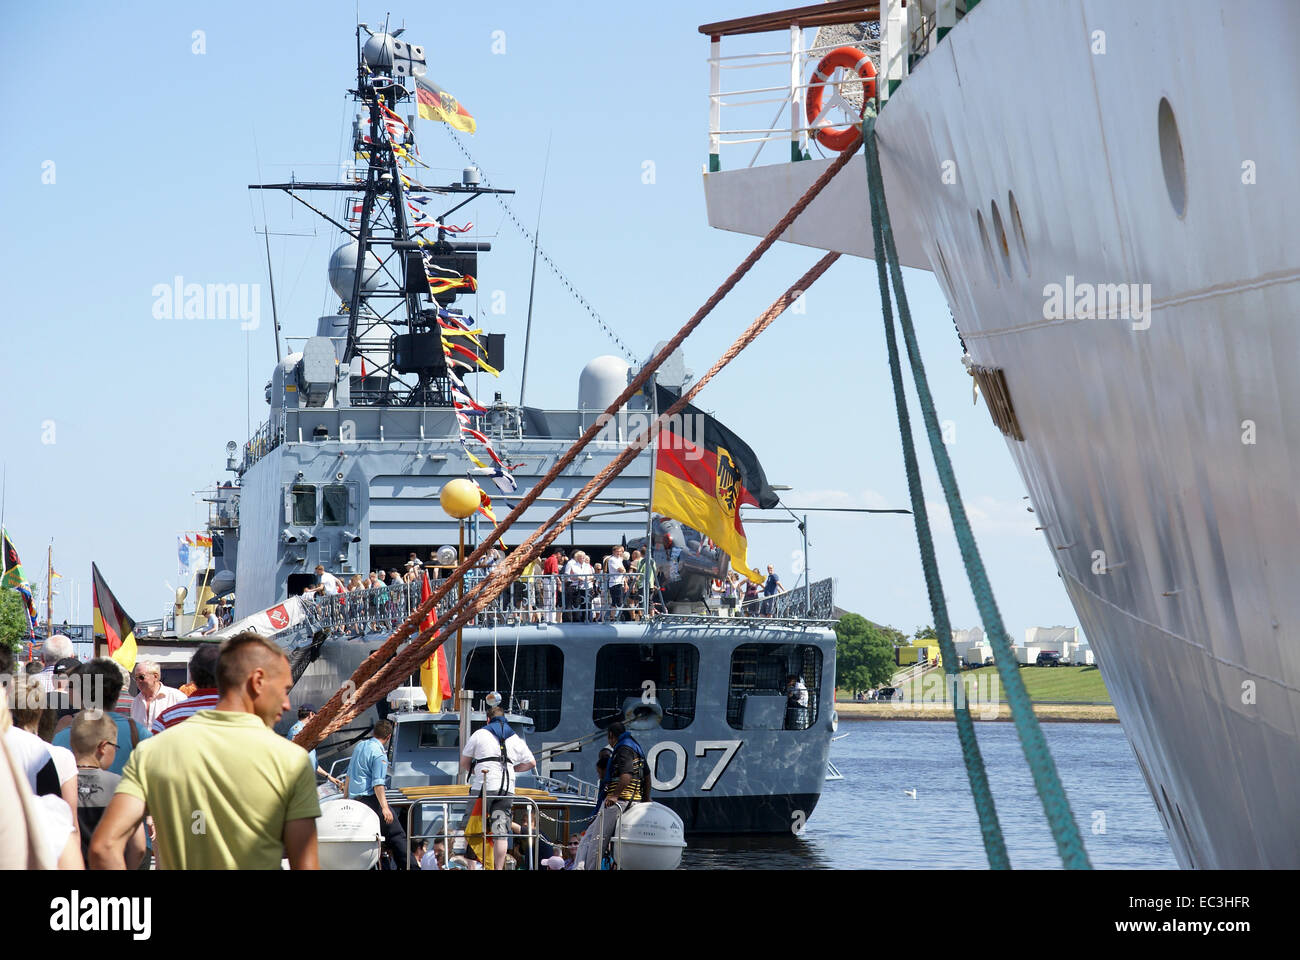 Bundeswehr Marine High Resolution Stock Photography and Images - Alamy